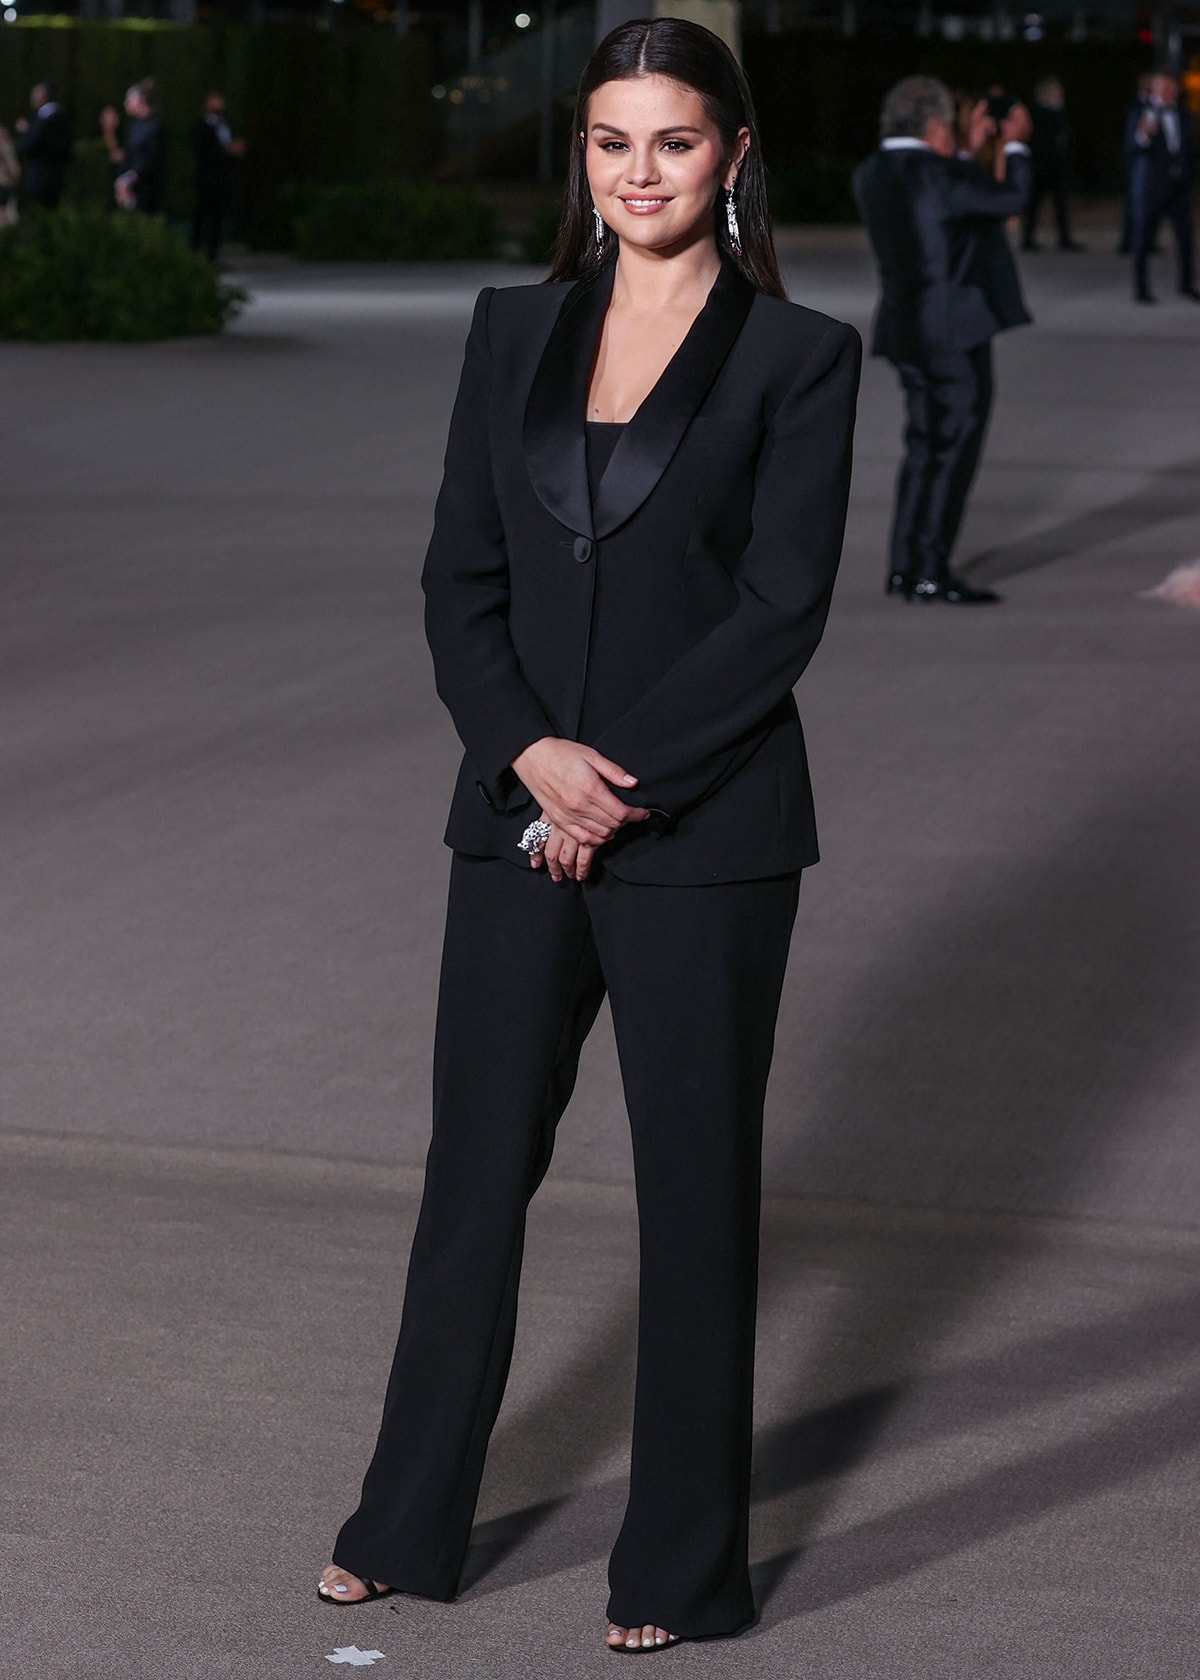 Selena Gomez at the 2nd Annual Academy Museum of Motion Pictures Gala presented by Rolex on October 15, 2022